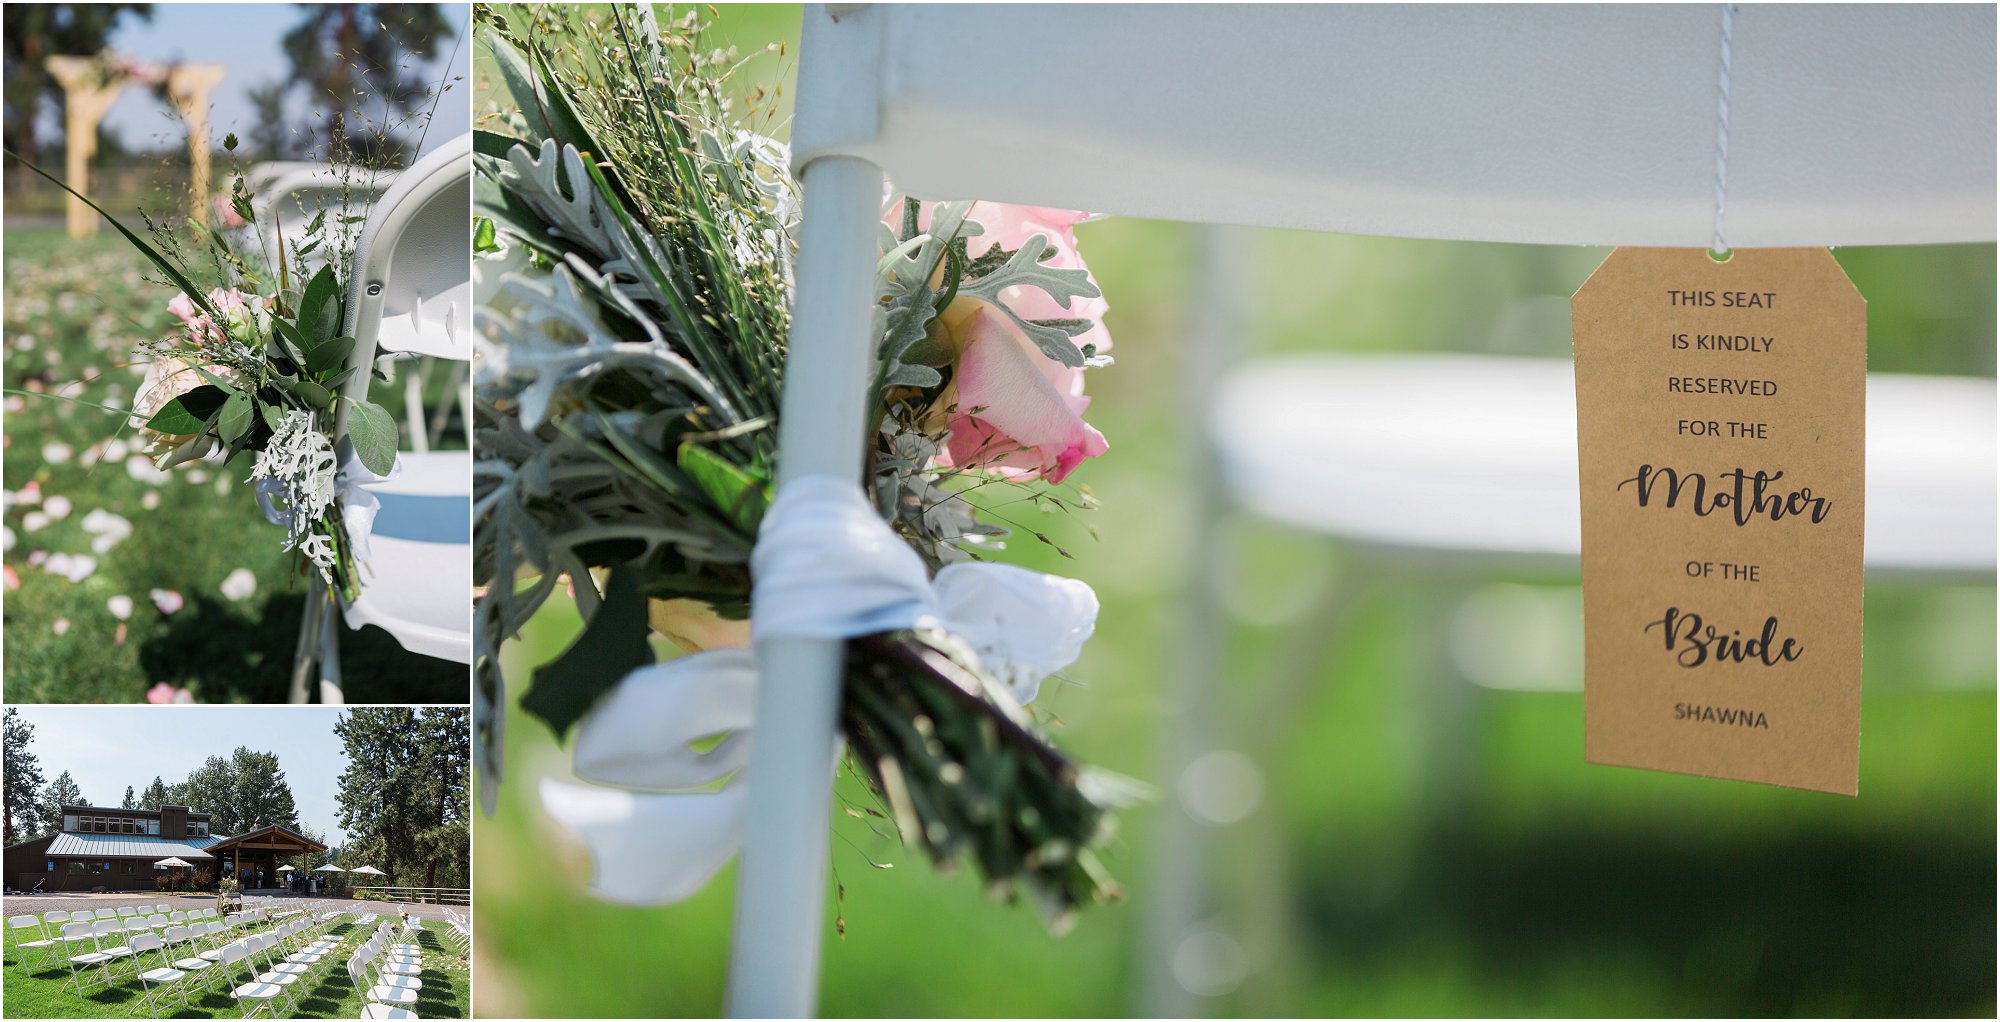 Beautiful pale roses and greenery adorn the ceremony archway and chairs at this rustic outdoor Rock Springs Ranch Wedding in Bend, OR. | Erica Swantek Photography